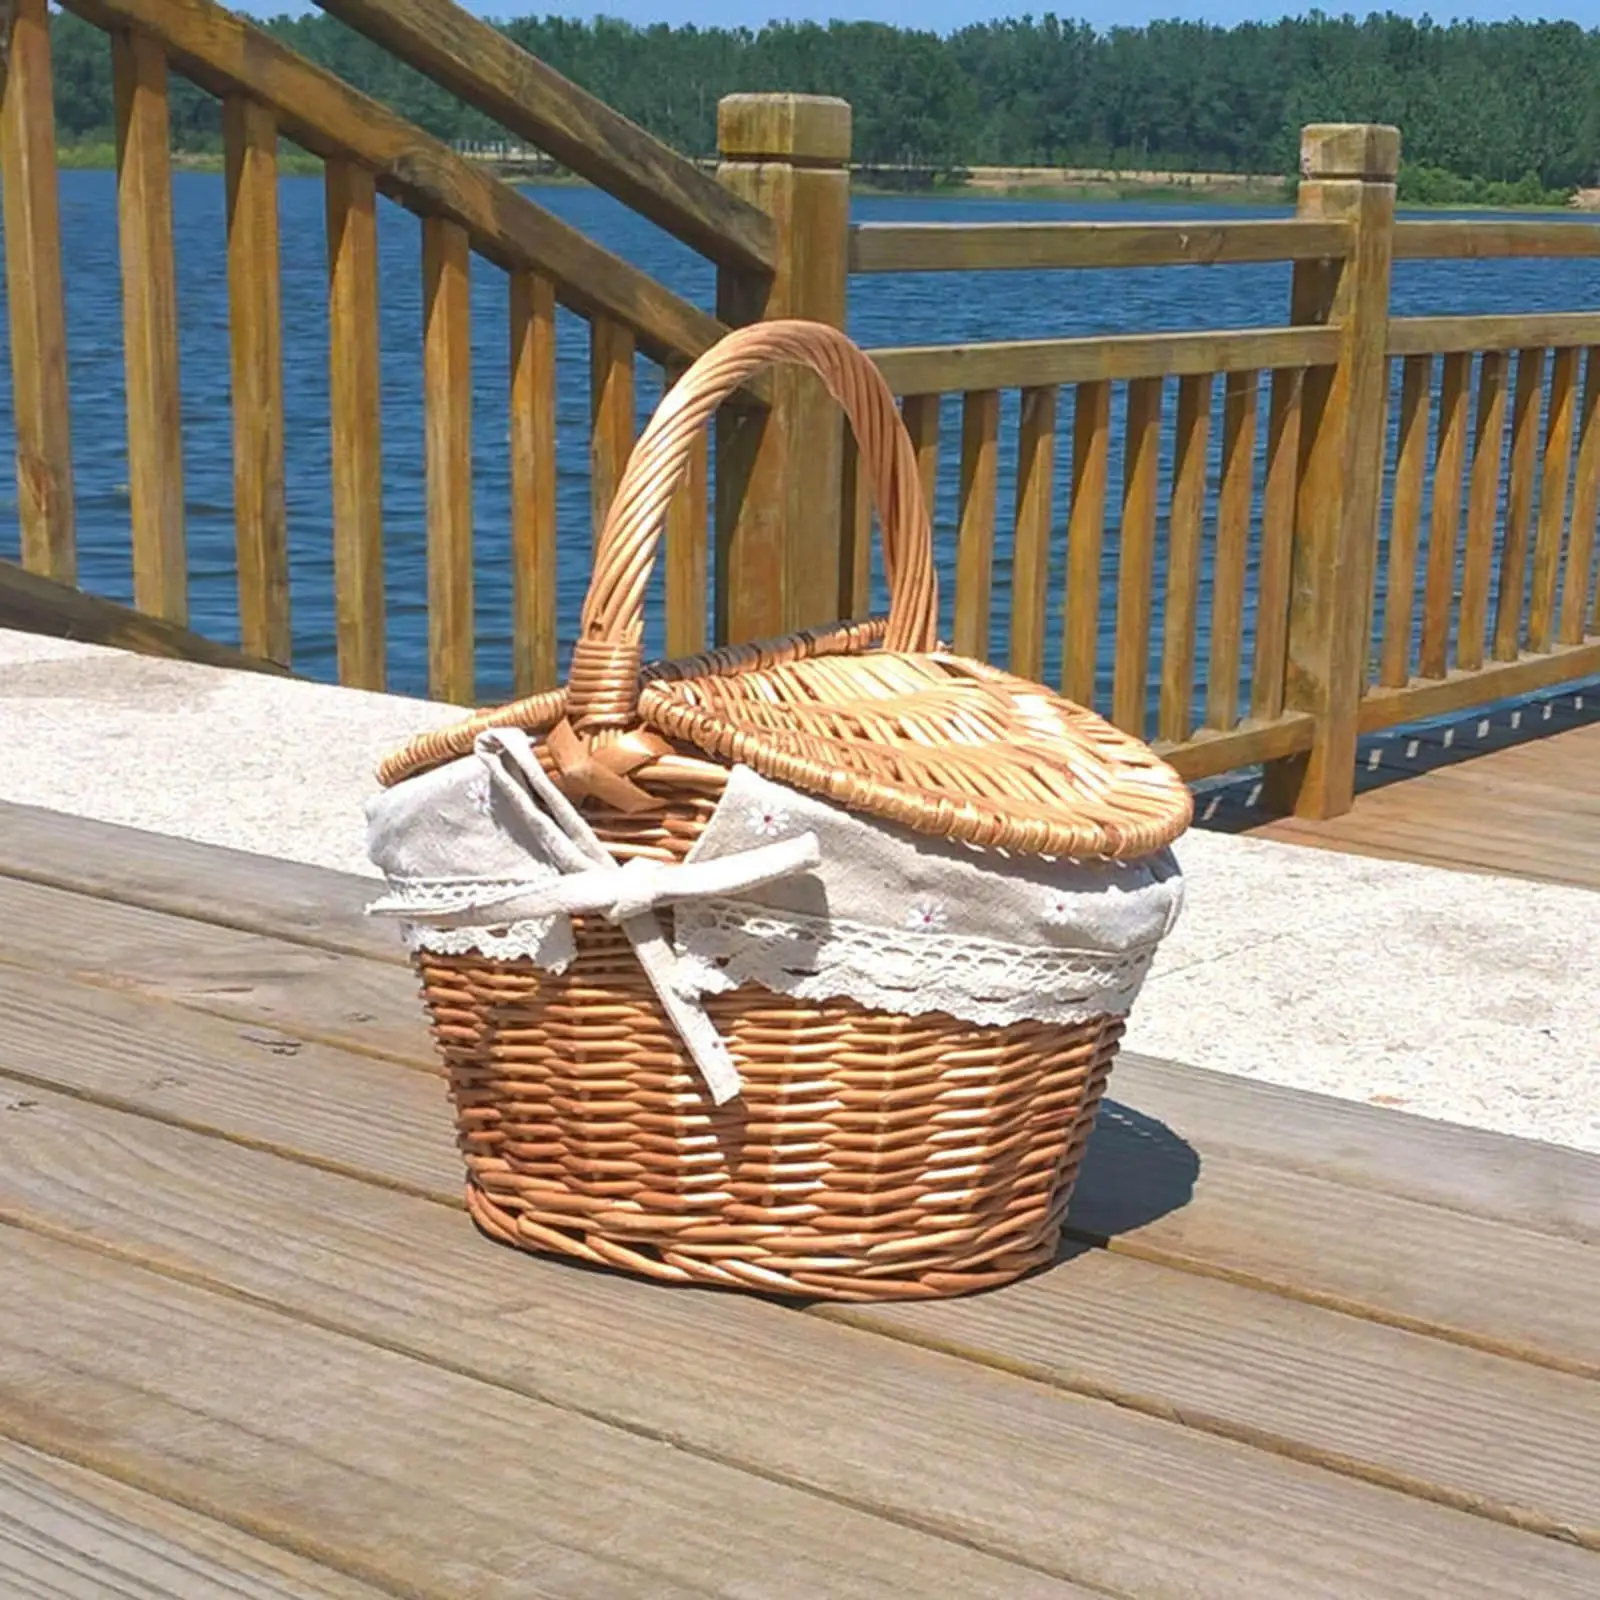 Handwoven Wicker Picnic Basket Rattan Storage Container Serving Basket with Washable Lining for Outdoor Camping Picnic